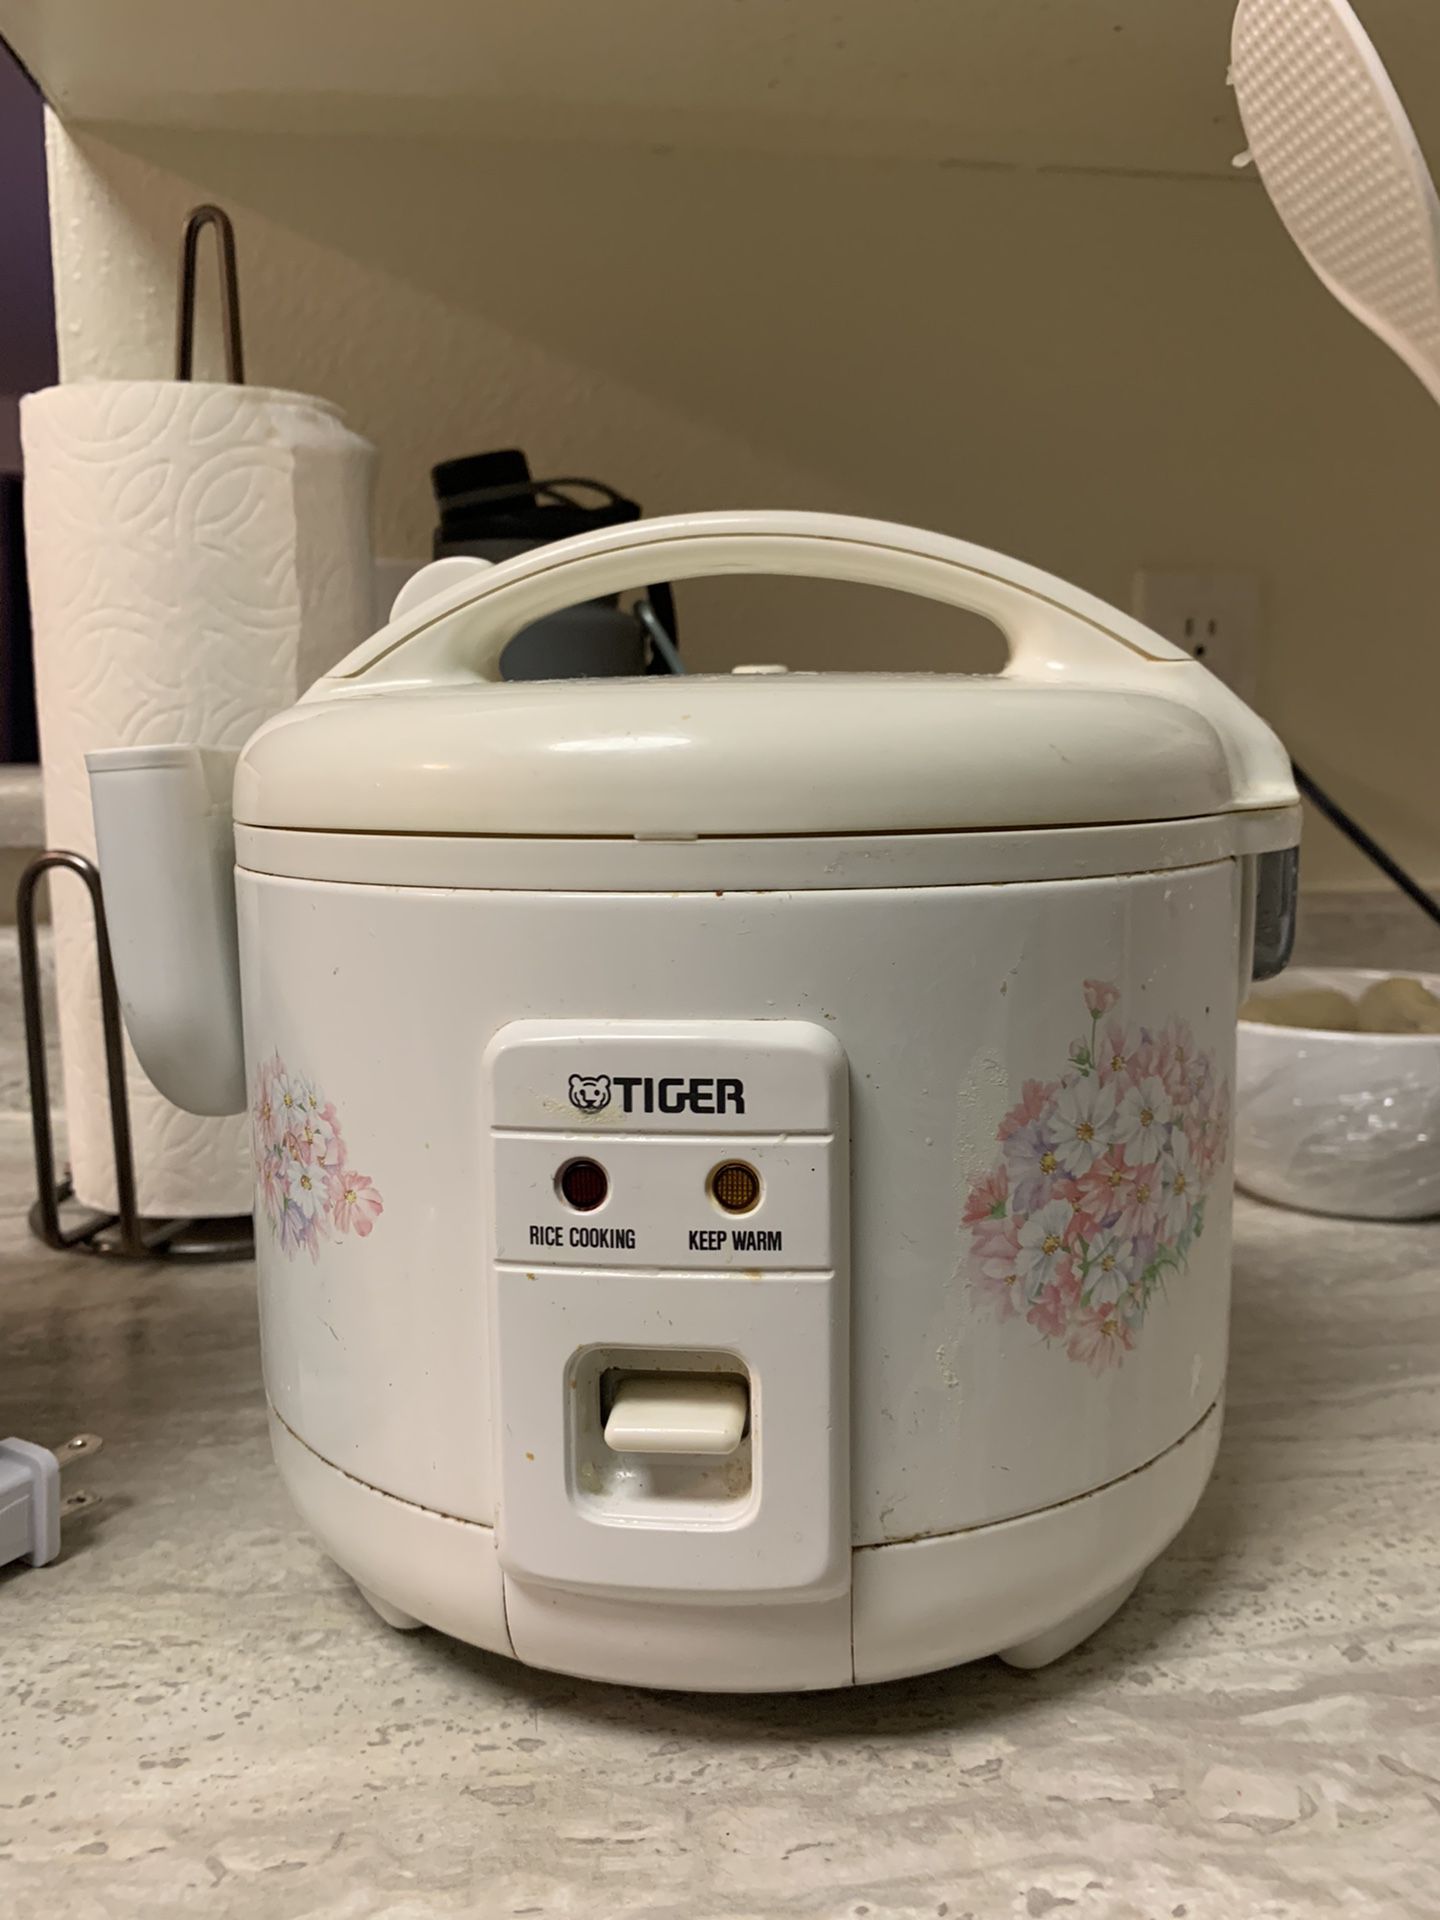 Tiger Rice Cooker 3 Cups for Sale in Kent, WA - OfferUp